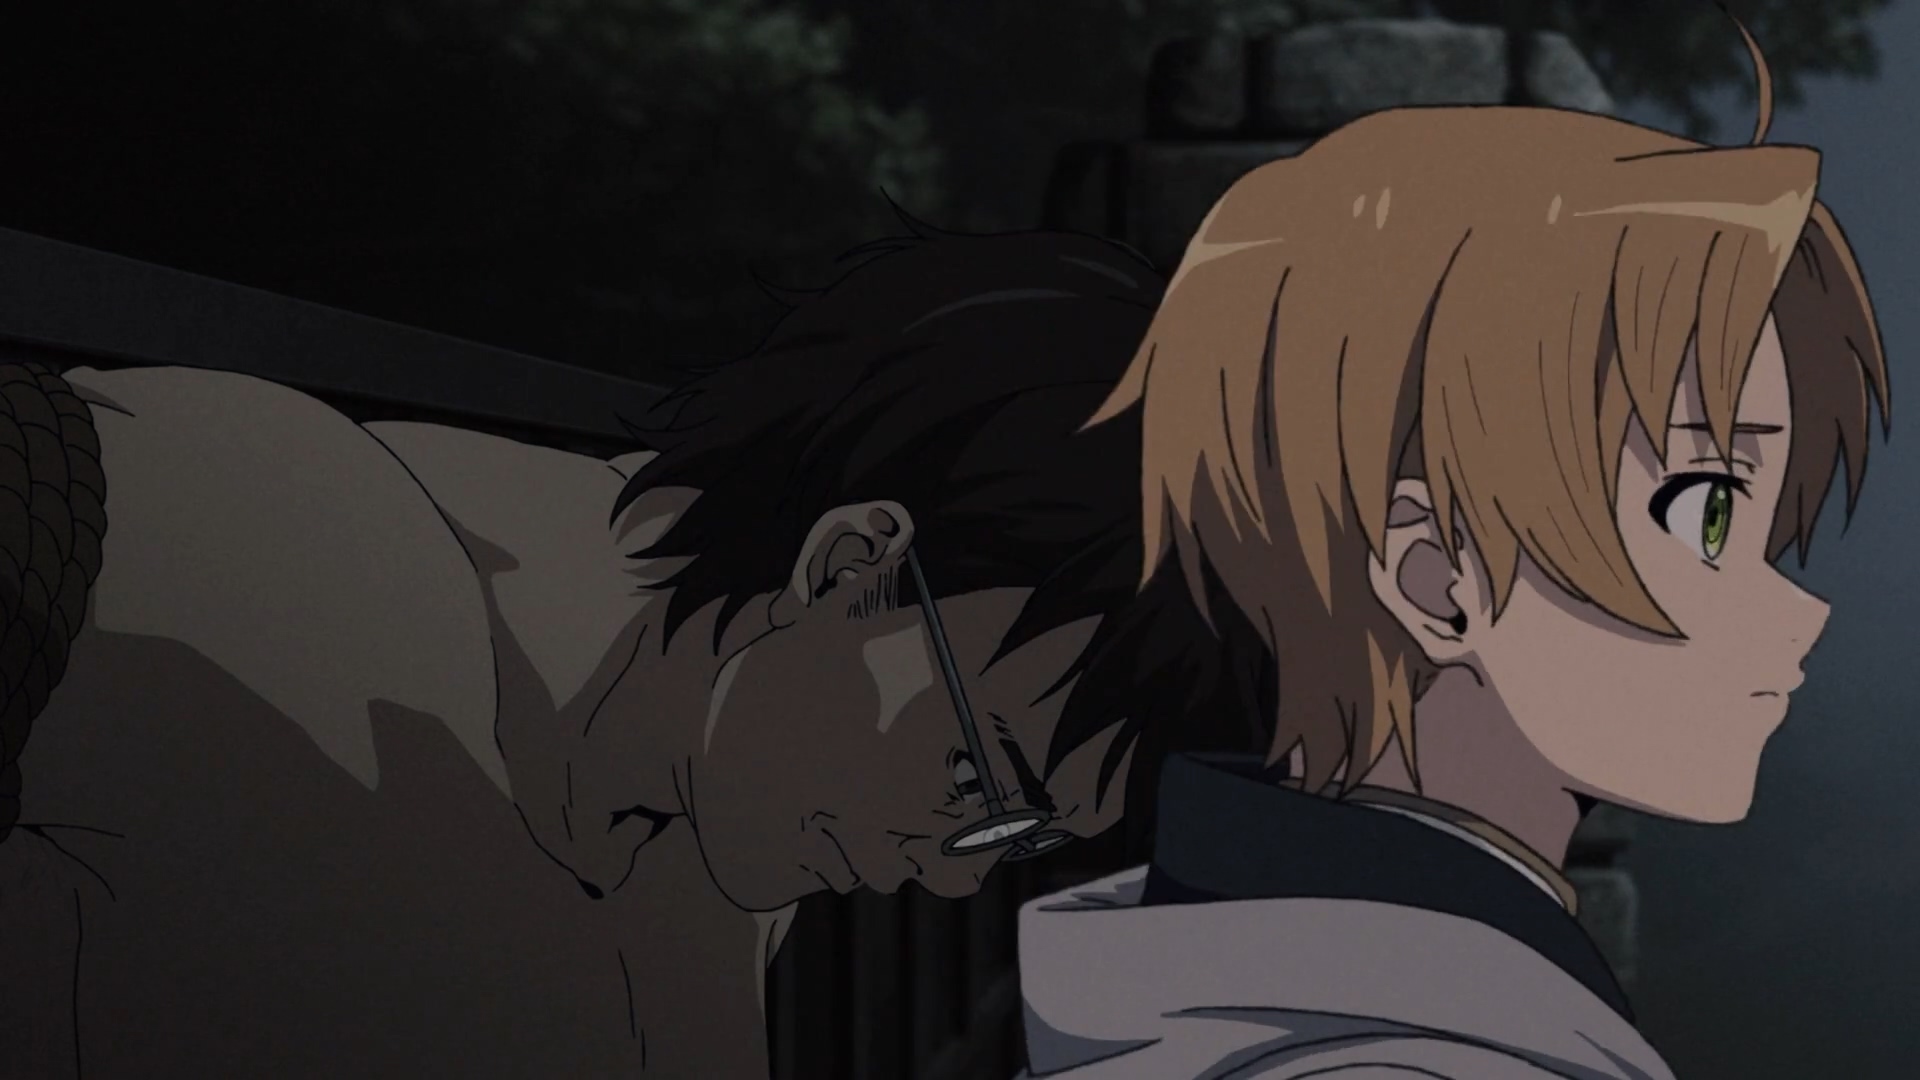 Mushoku Tensei Prepares for the Finale With Heartbreaking Goodbyes